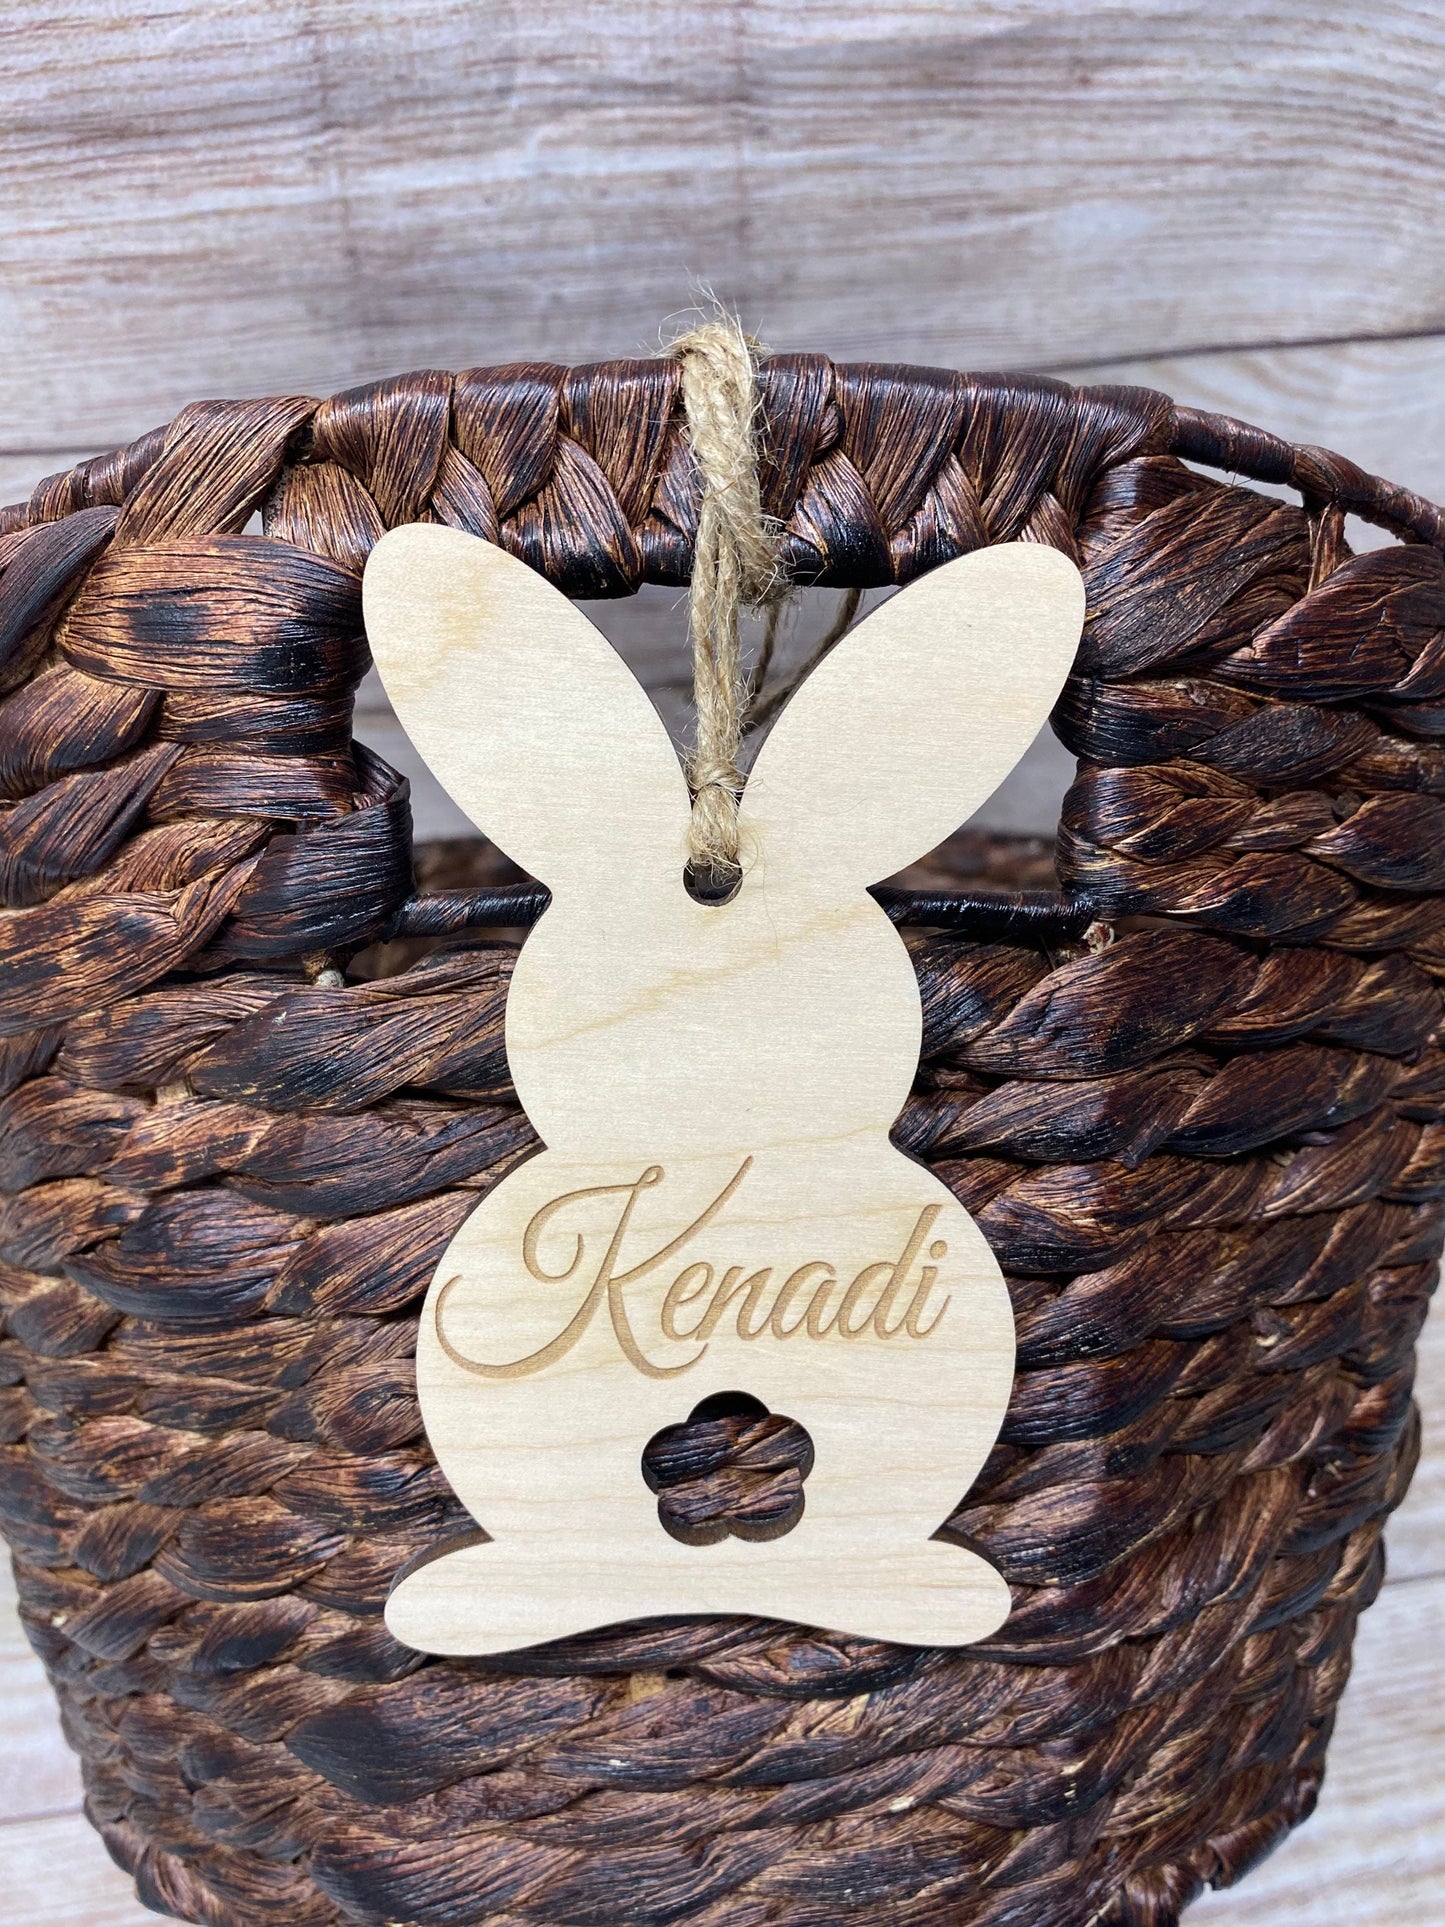 Wood Easter Bunny Basket Personalized Name Tag, Easter Basket Gift Tag